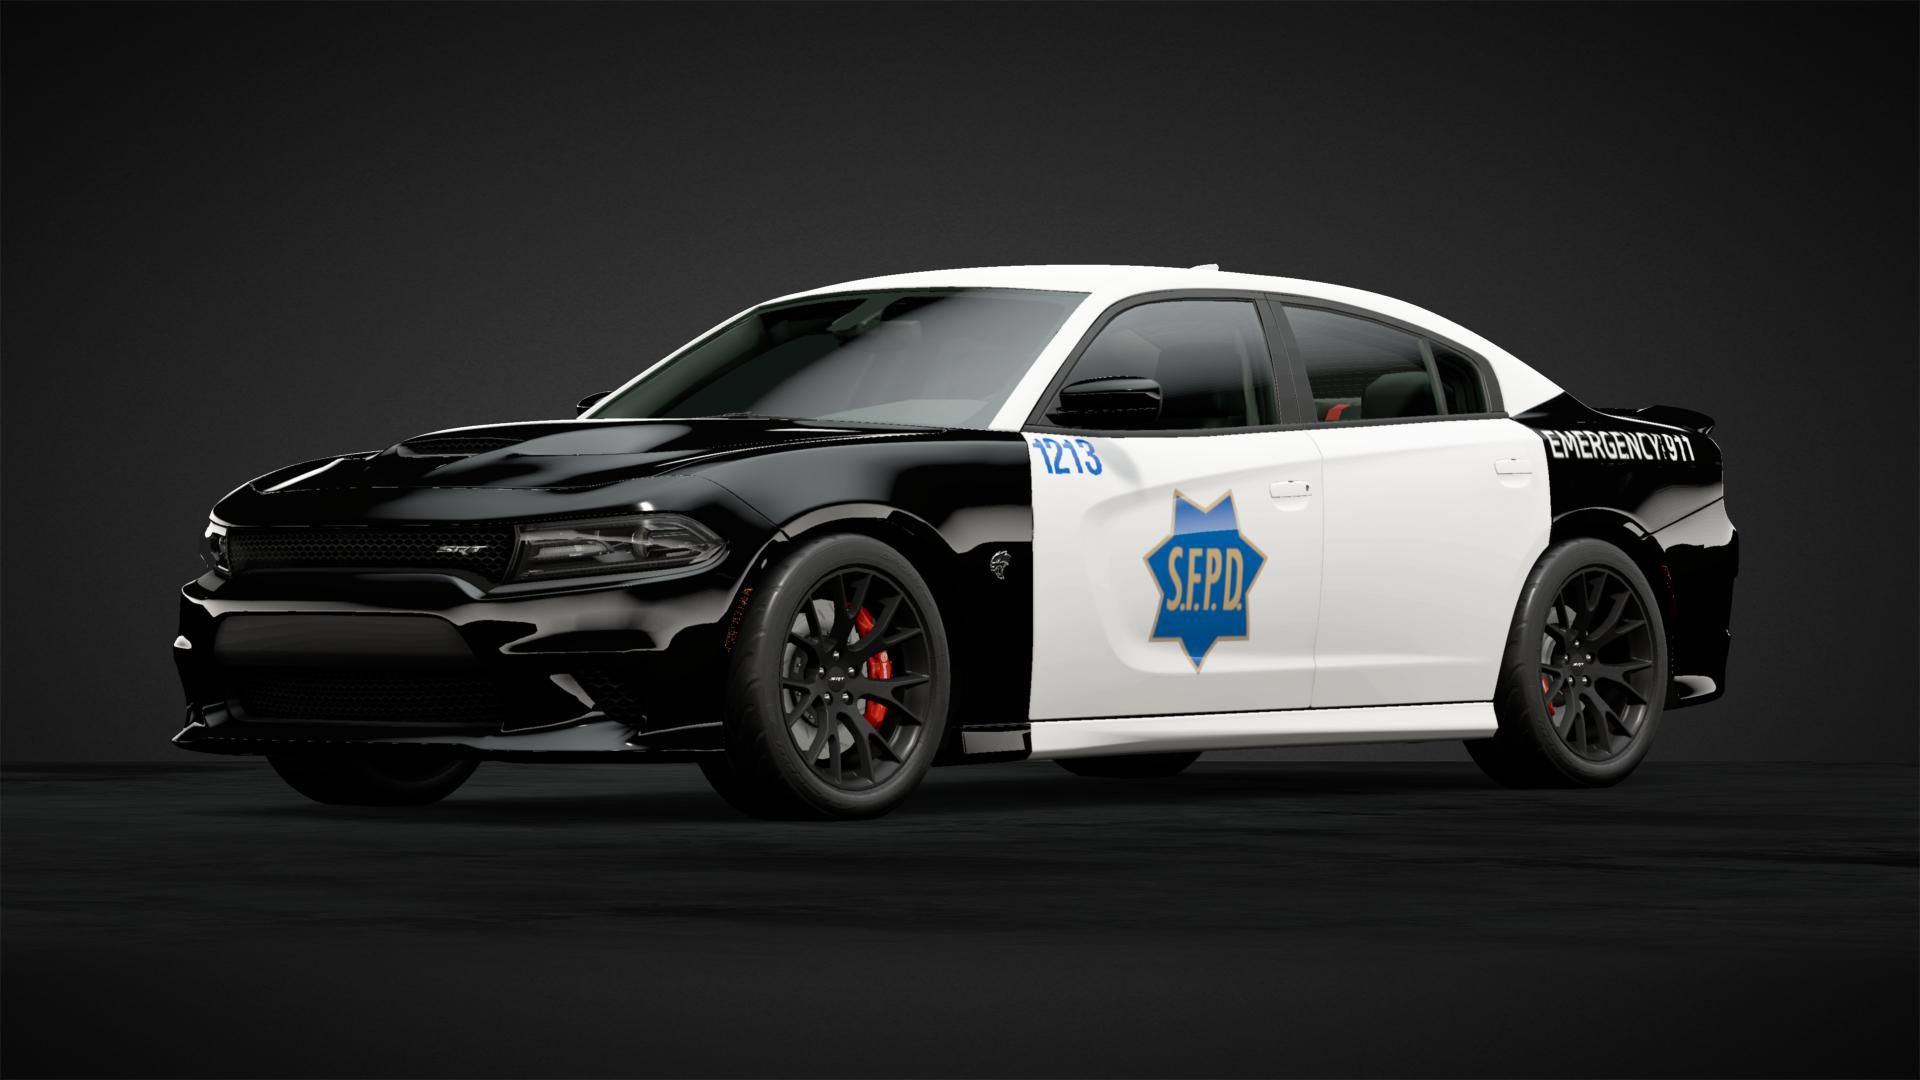 SFPD Livery by Dr_Krieger_ISIS1. Community. Gran Turismo Sport